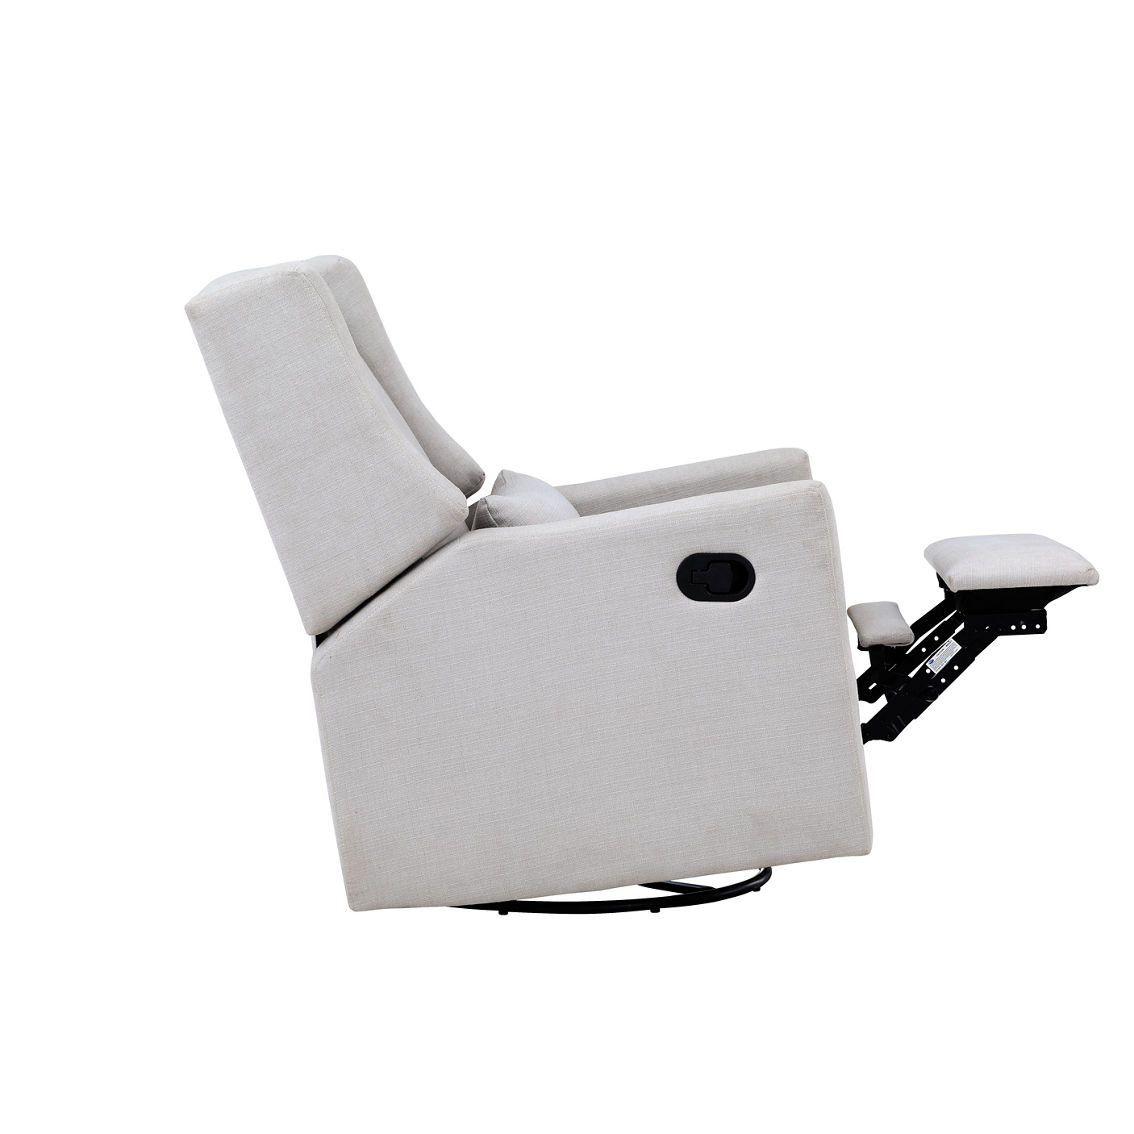 Suite Bebe Pronto Swivel Glider Recliner with Pillow Blanco Fabric - Image 4 of 5